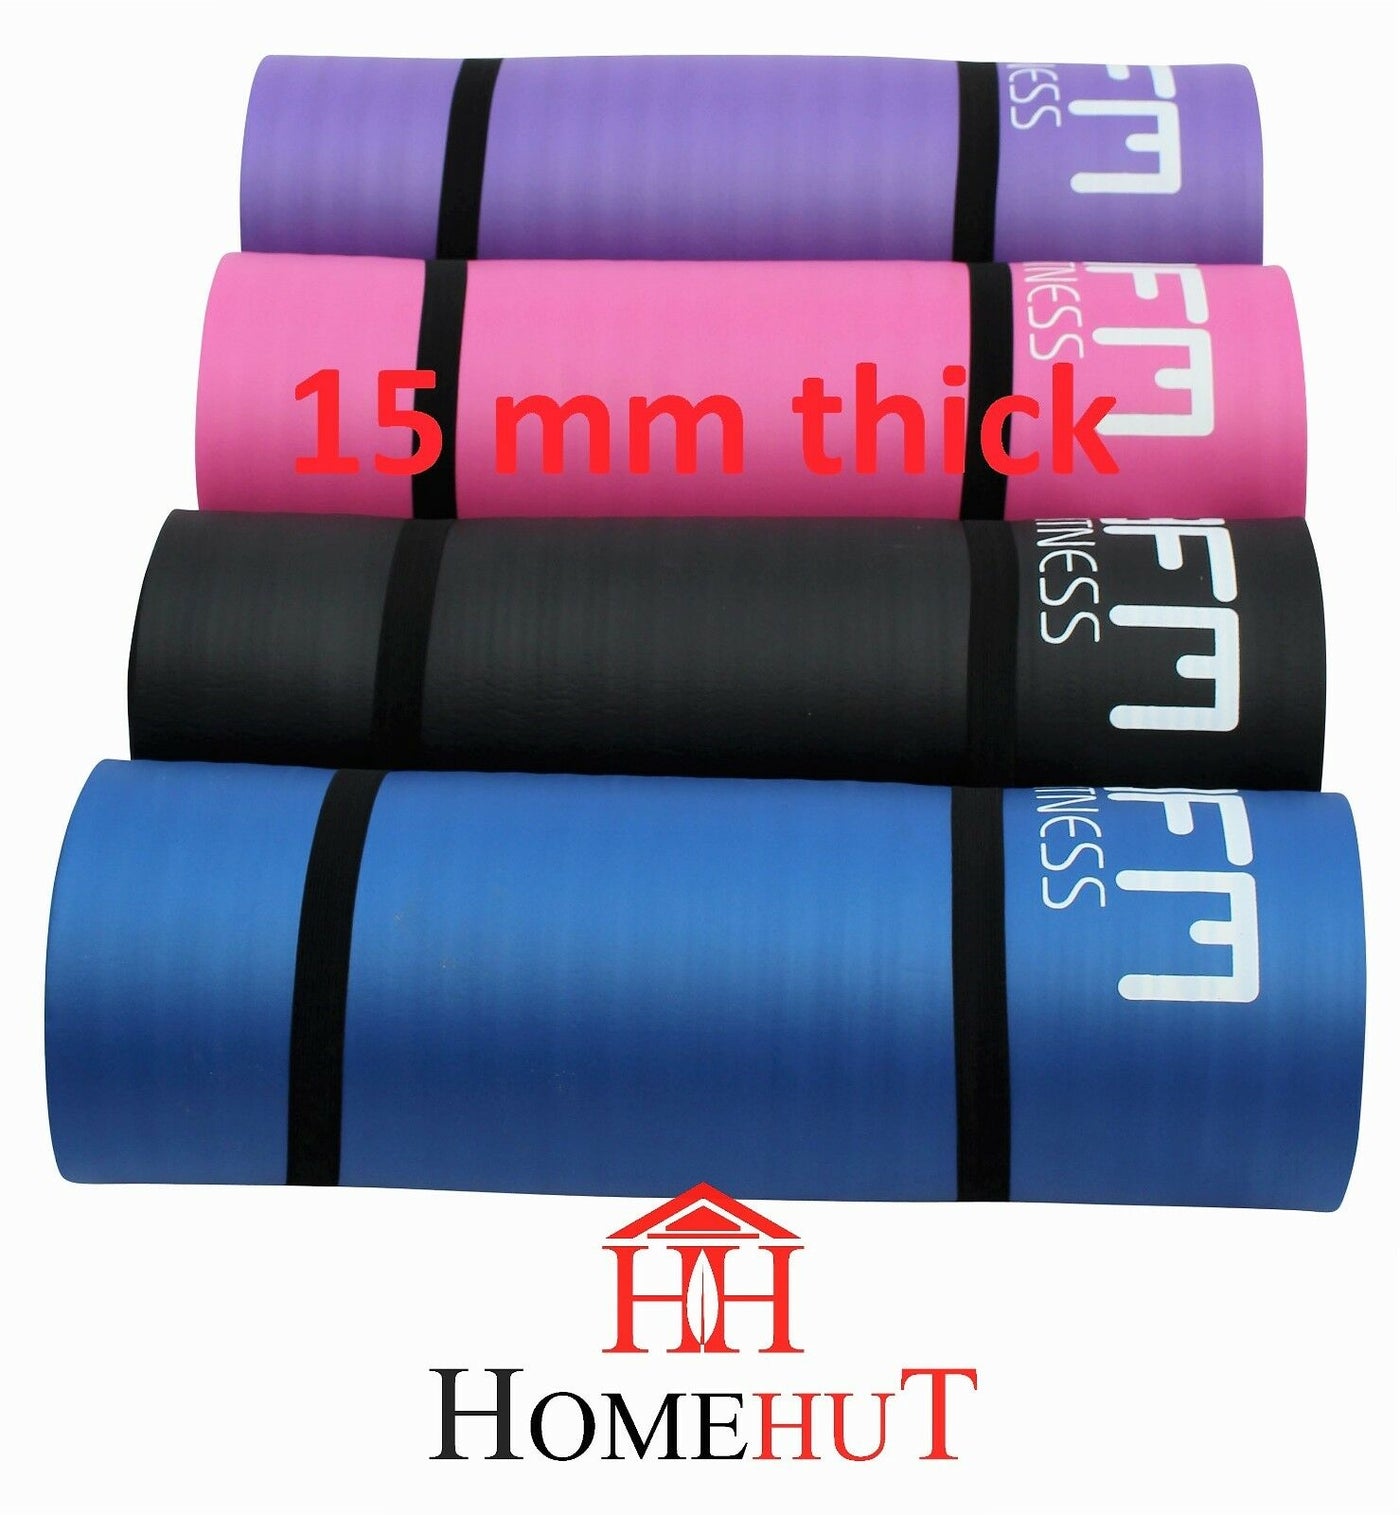 Thick Yoga Mat – The Home Hut